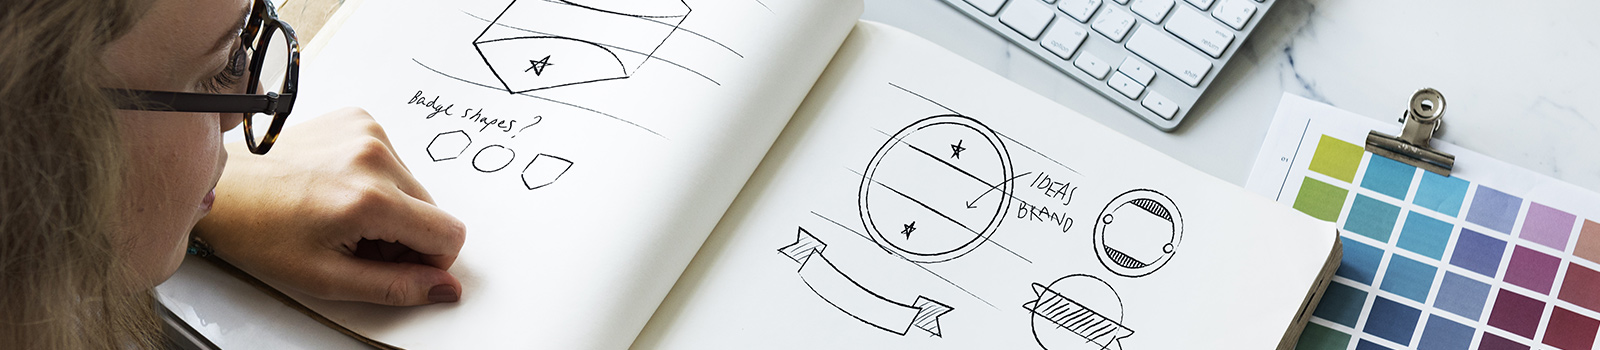 Designer looks at ideas for logo design and branding, using a sketch books and a color guide